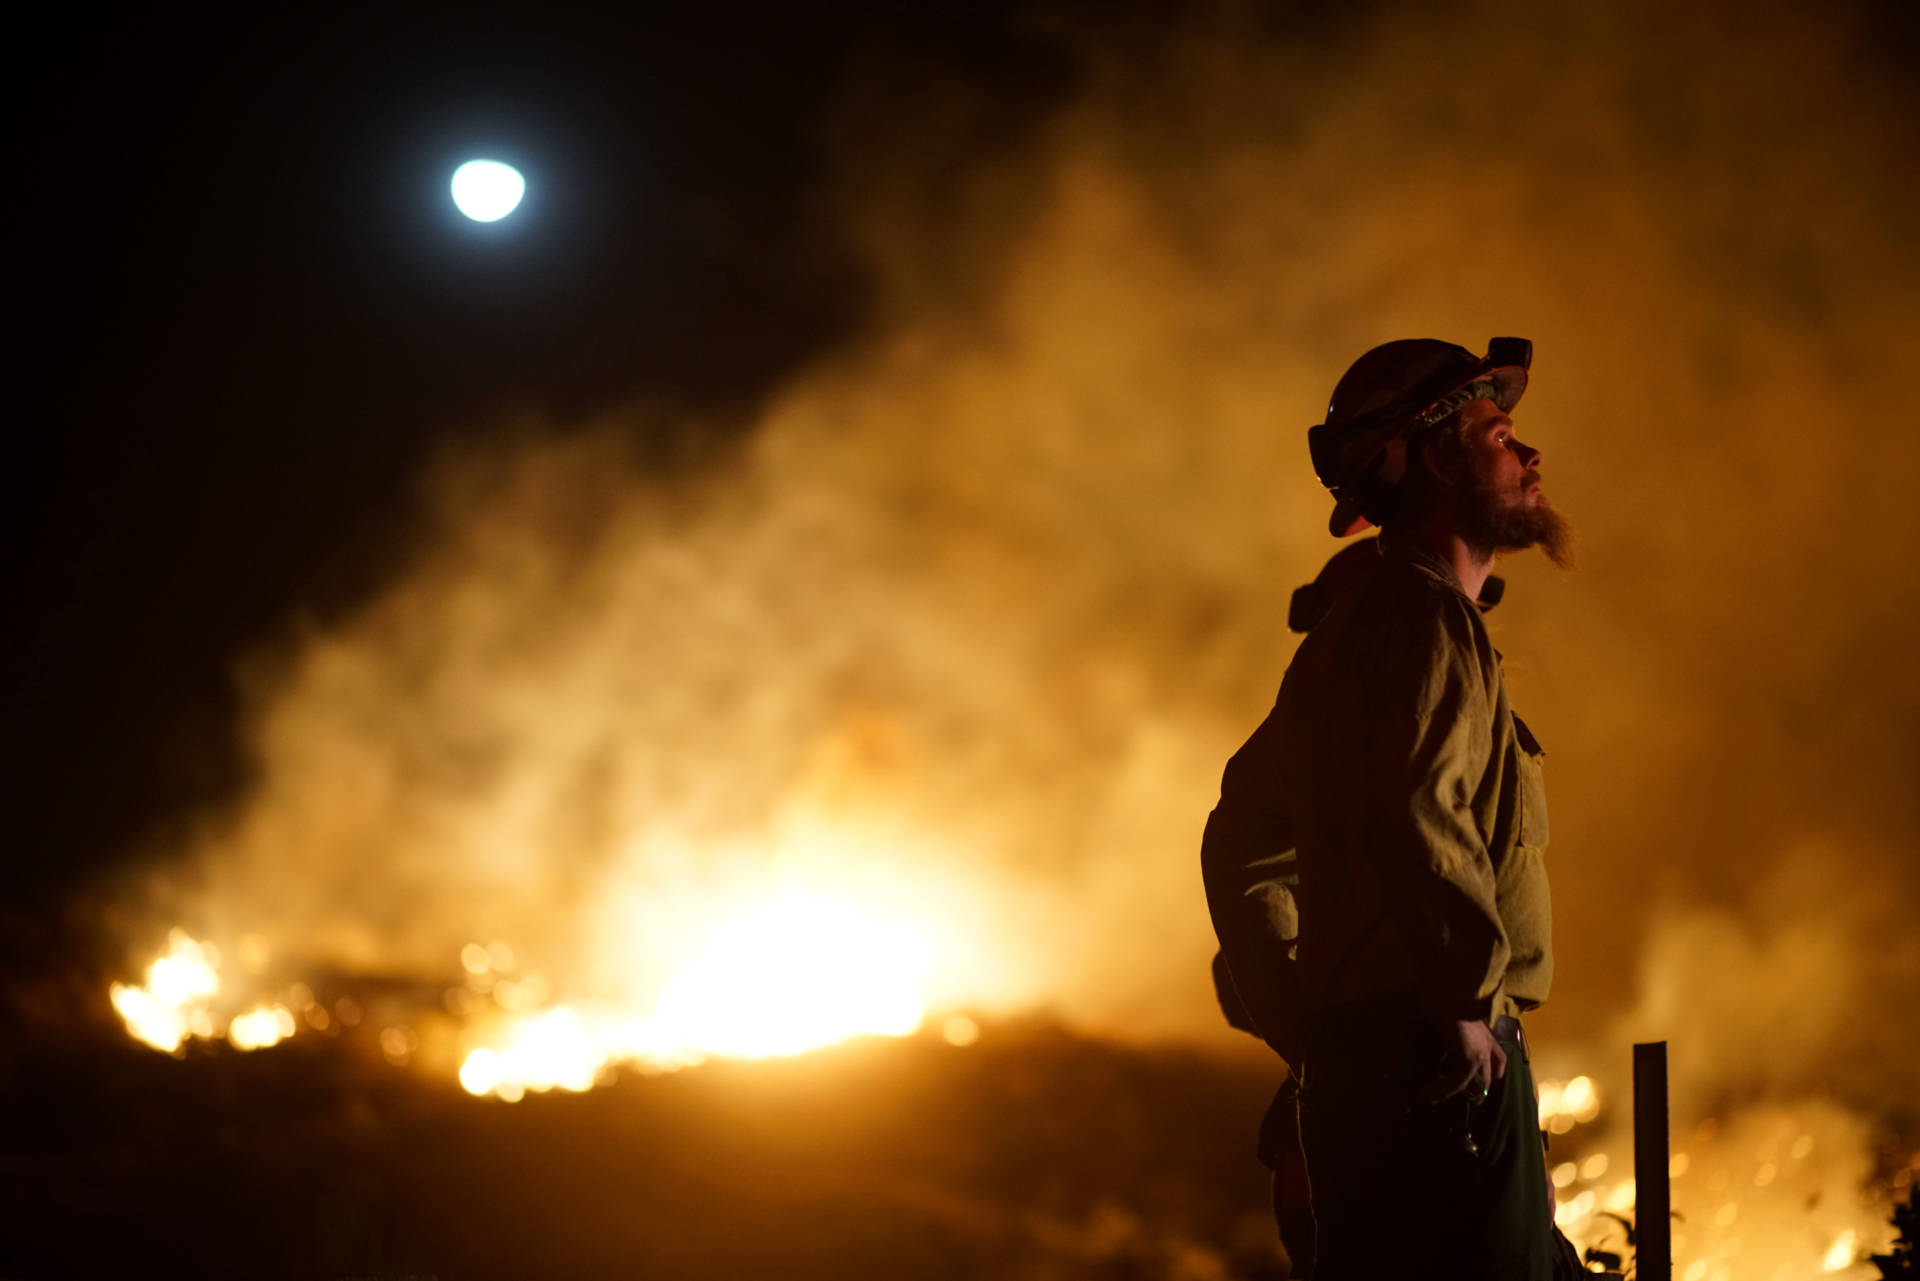 A firefighter watches the fire line at the Lilac fire in Bonsall, California on Dec. 7, 2017. Local emergency officials warned of powerful winds on Dec. 7 that will feed wildfires raging in Los Angeles, threatening multi-million dollar mansions with blazes that have already forced more than 200,000 people to flee. Sandy Huffaker/AFP/Getty Images